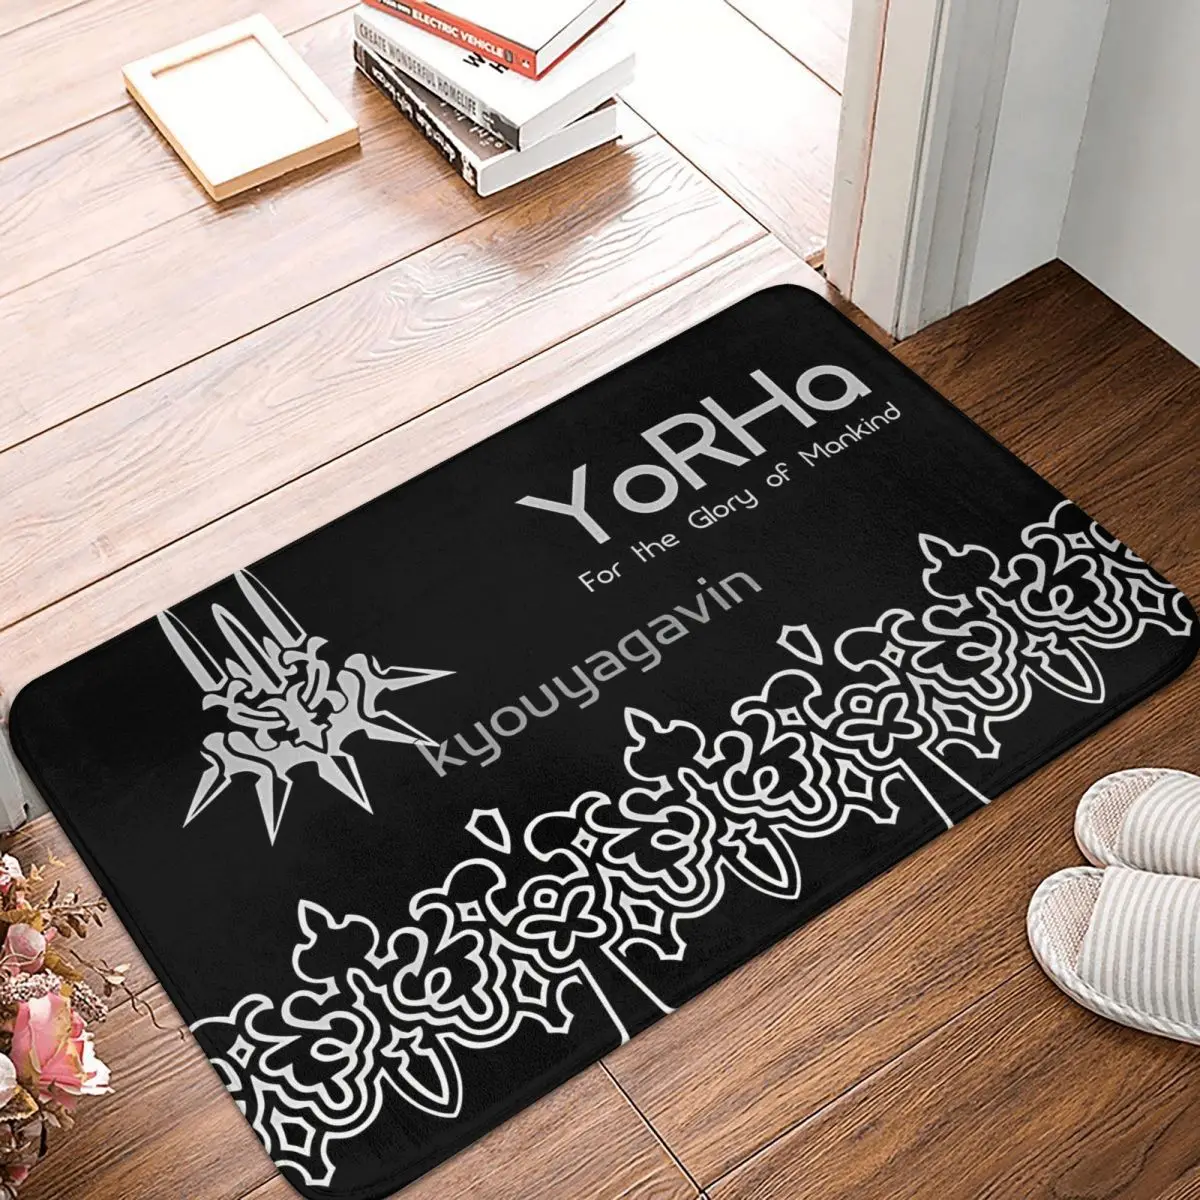 For The Glory Of Mankind Drakengard Drag-on Dragoon Game Bedroom Mat Rug Home Doormat Kitchen Carpet Balcony